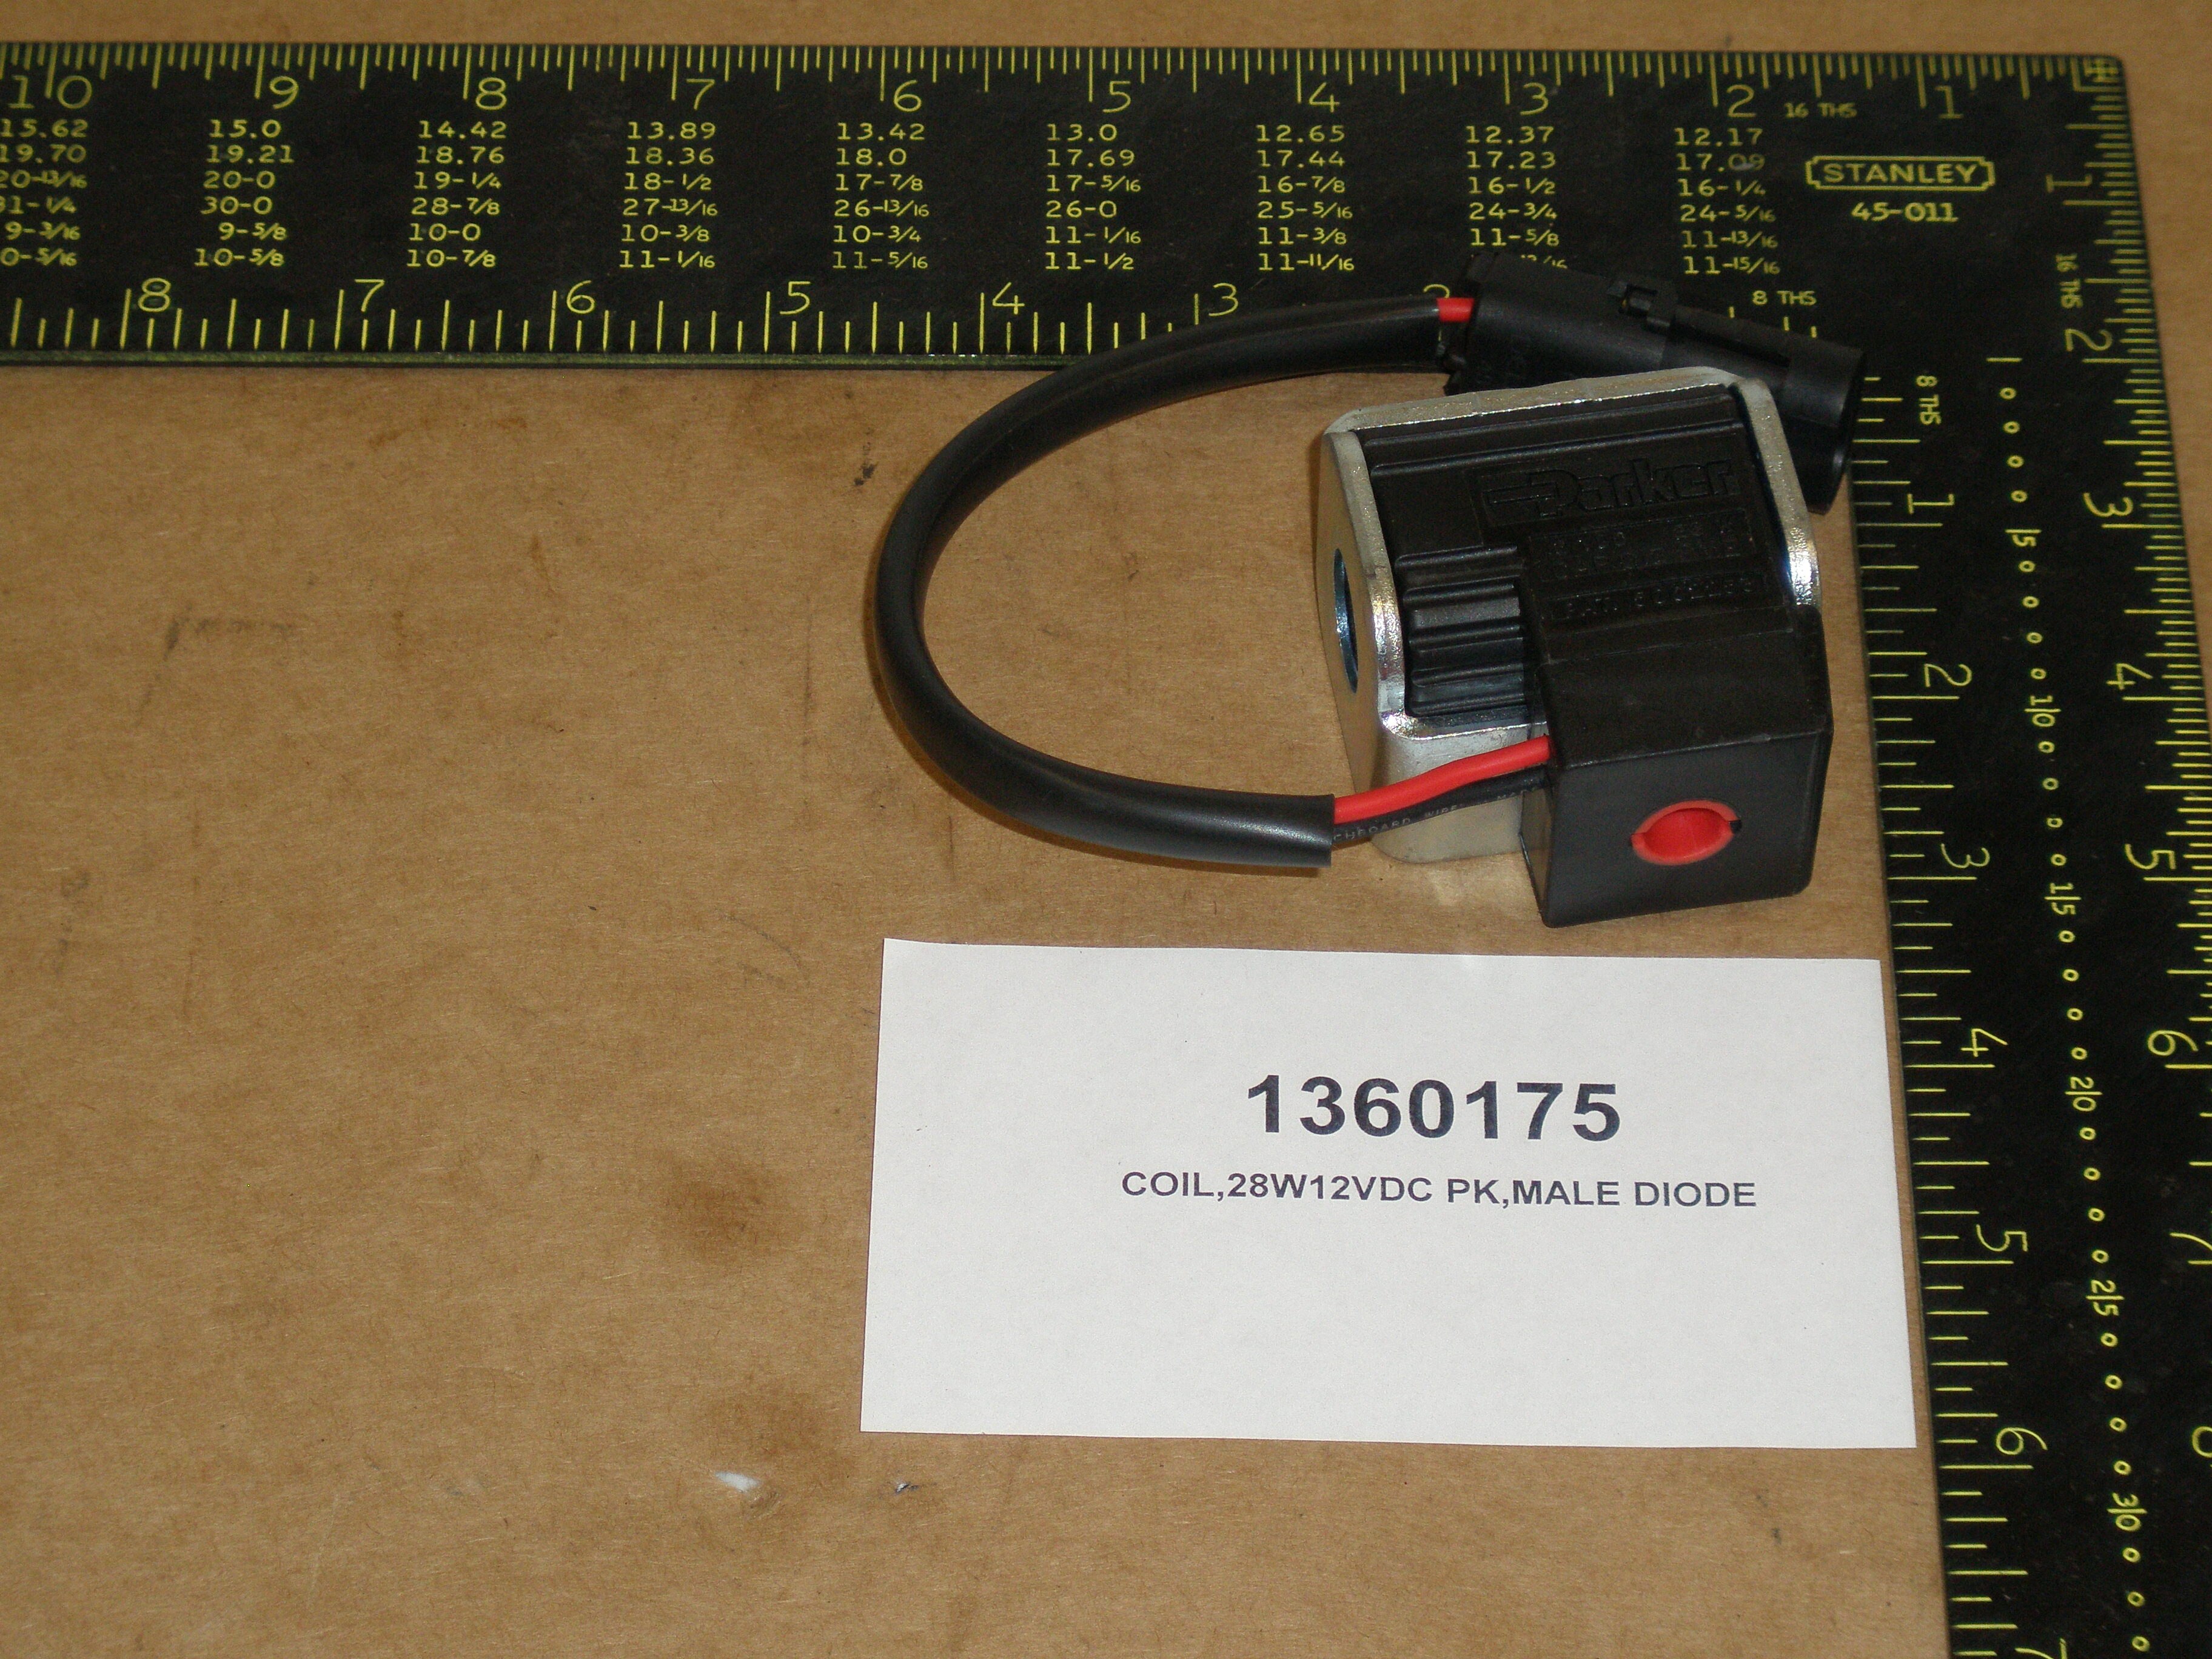 COIL,28W12VDC PK,MALE DIODE